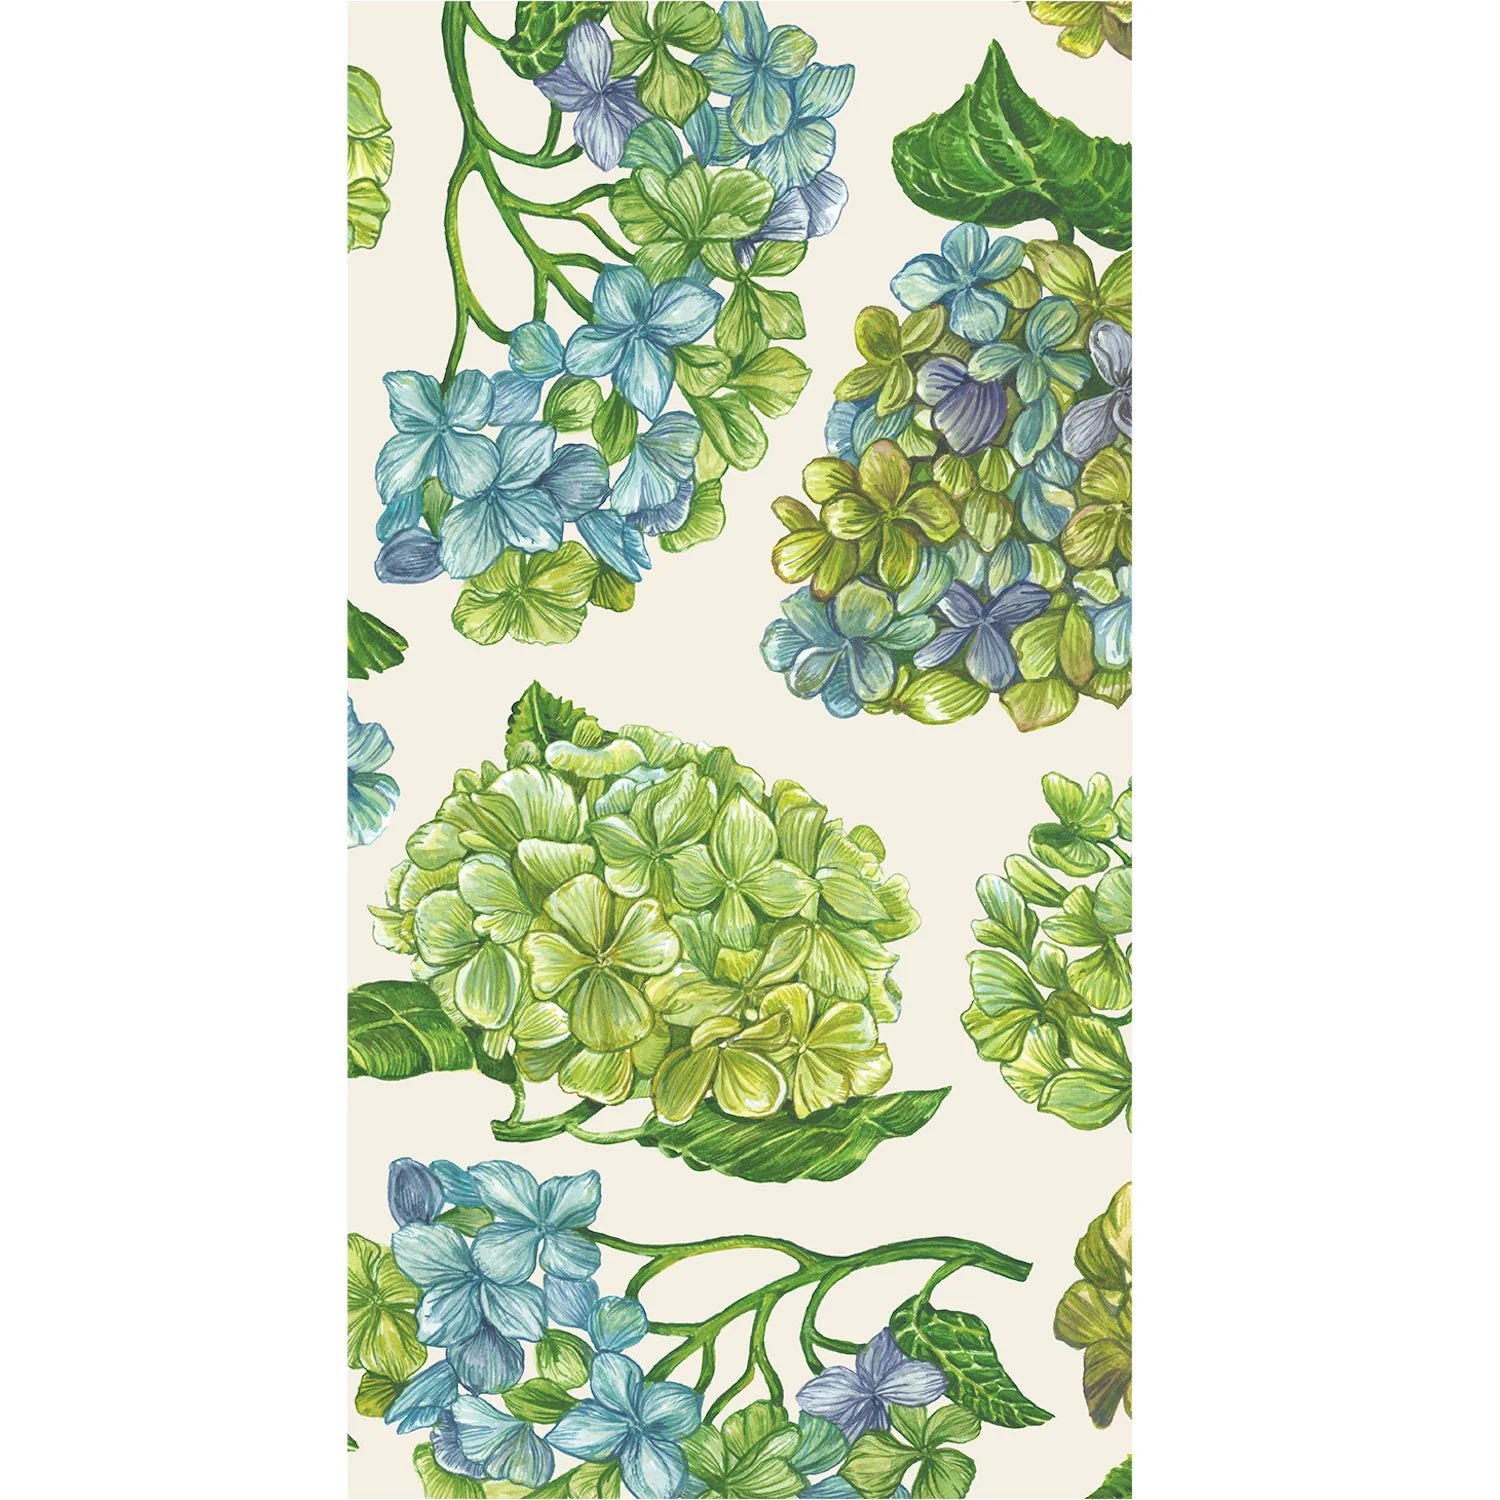 Hydrangea Napkins by Hester & Cook